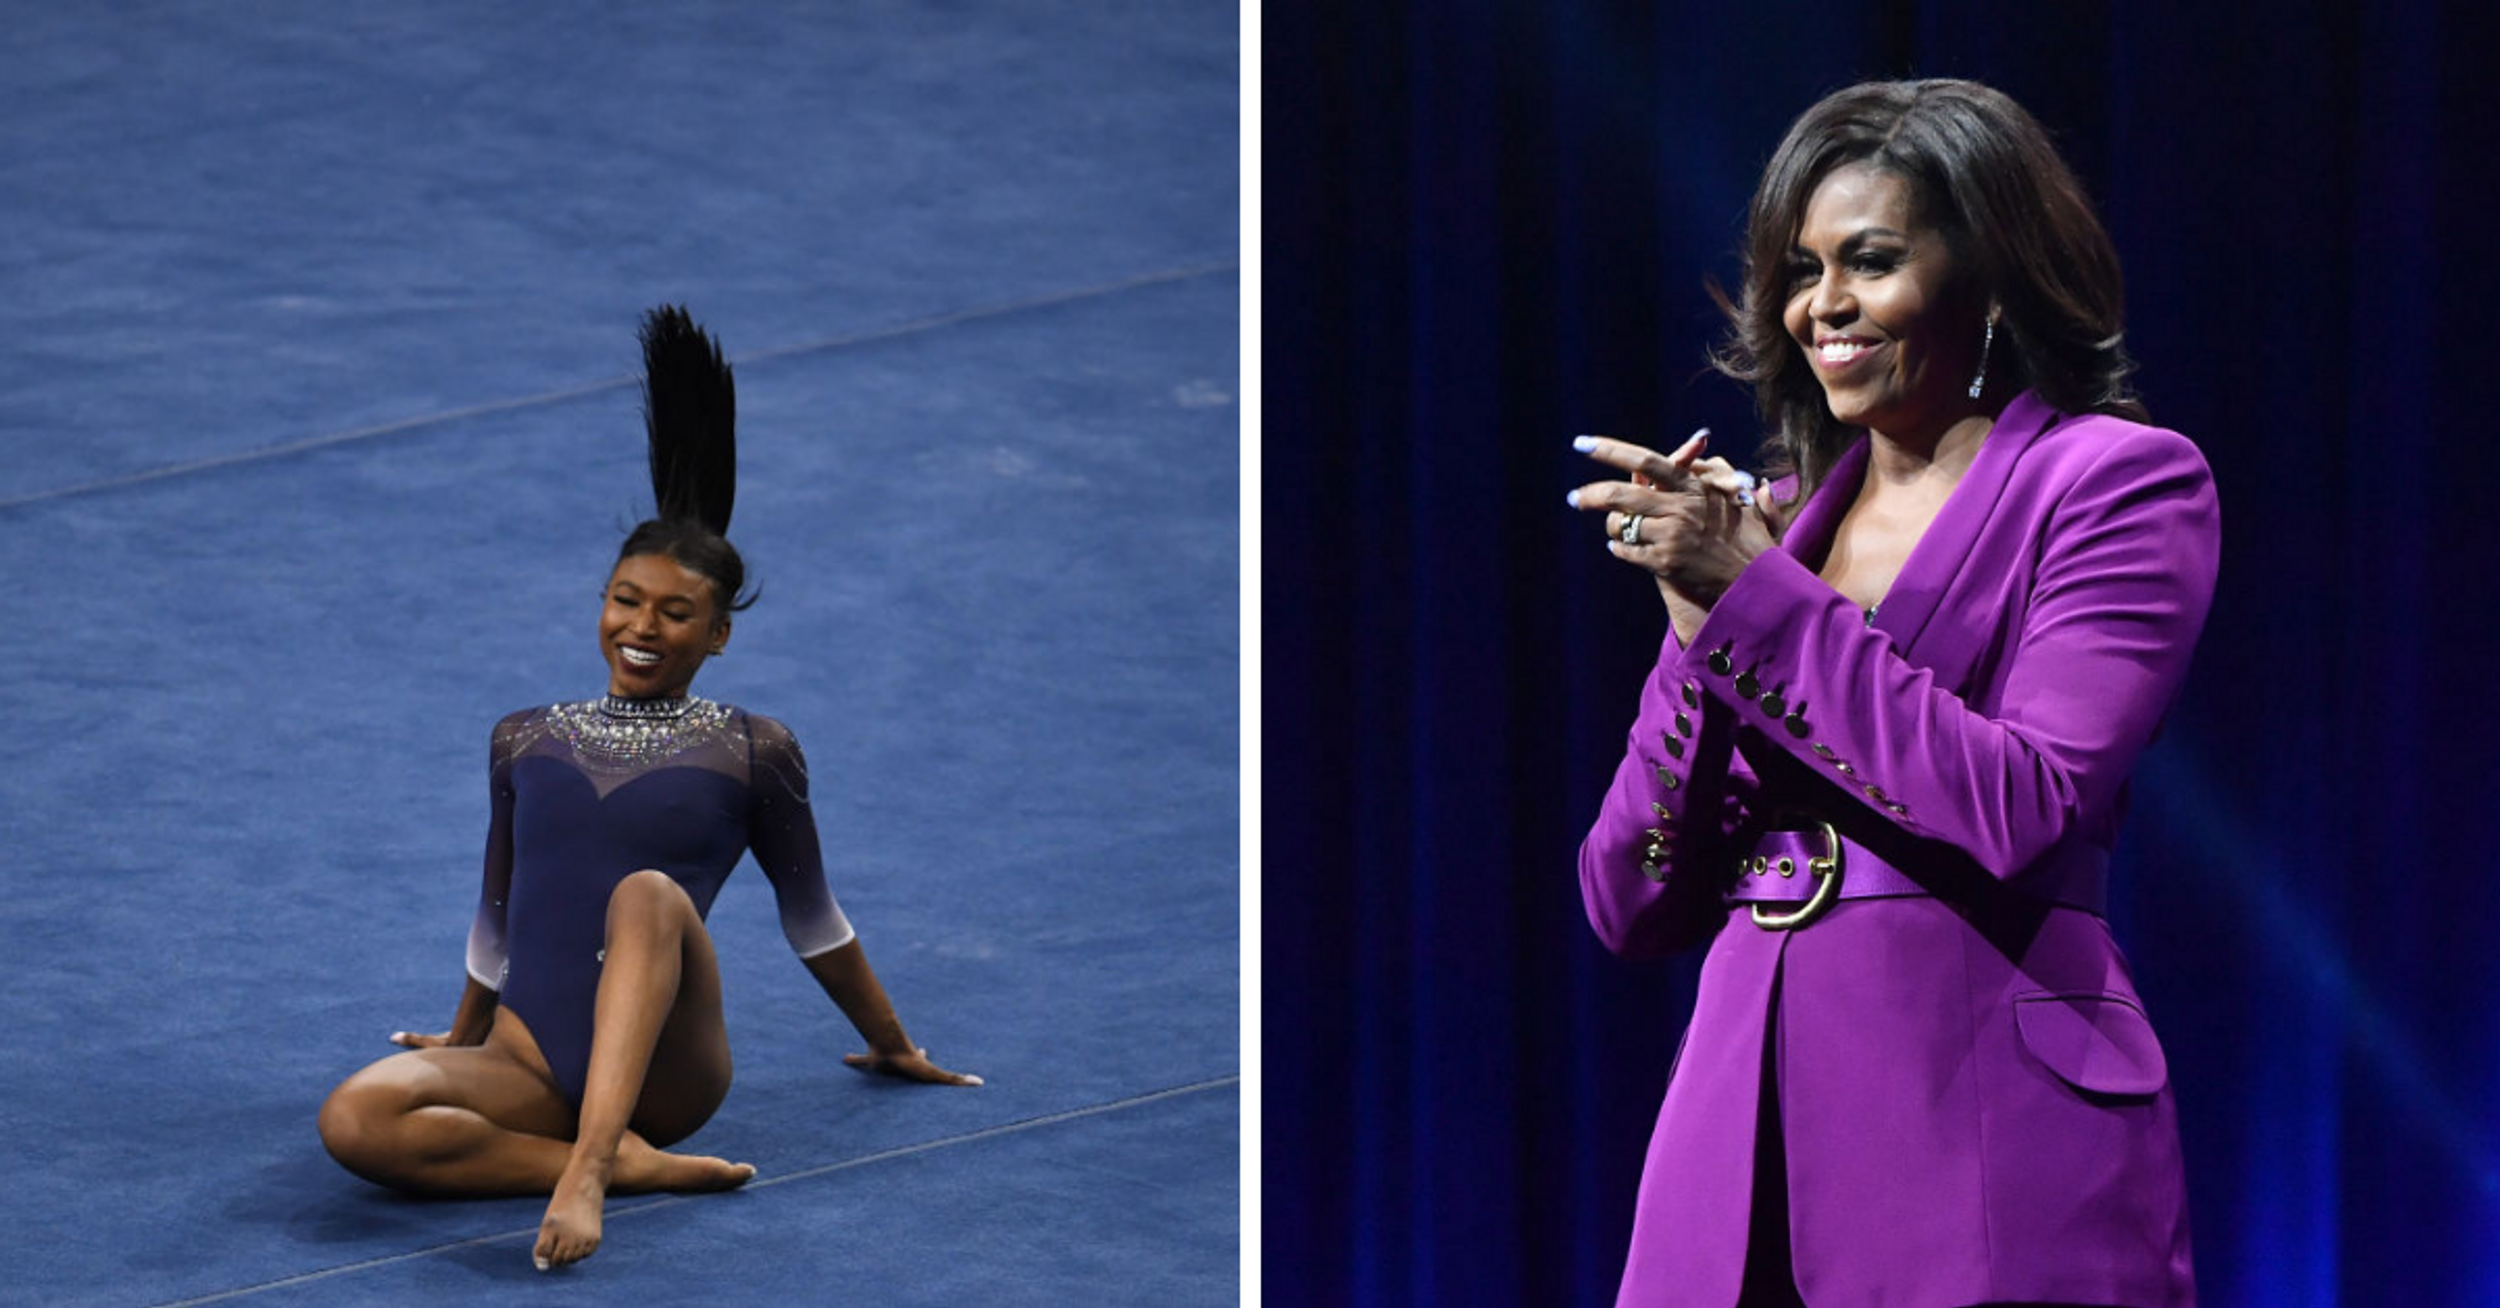 UCLA Gymnast Left 'Speechless' After Michelle Obama Gives Shout Out To Her Viral Floor Routine